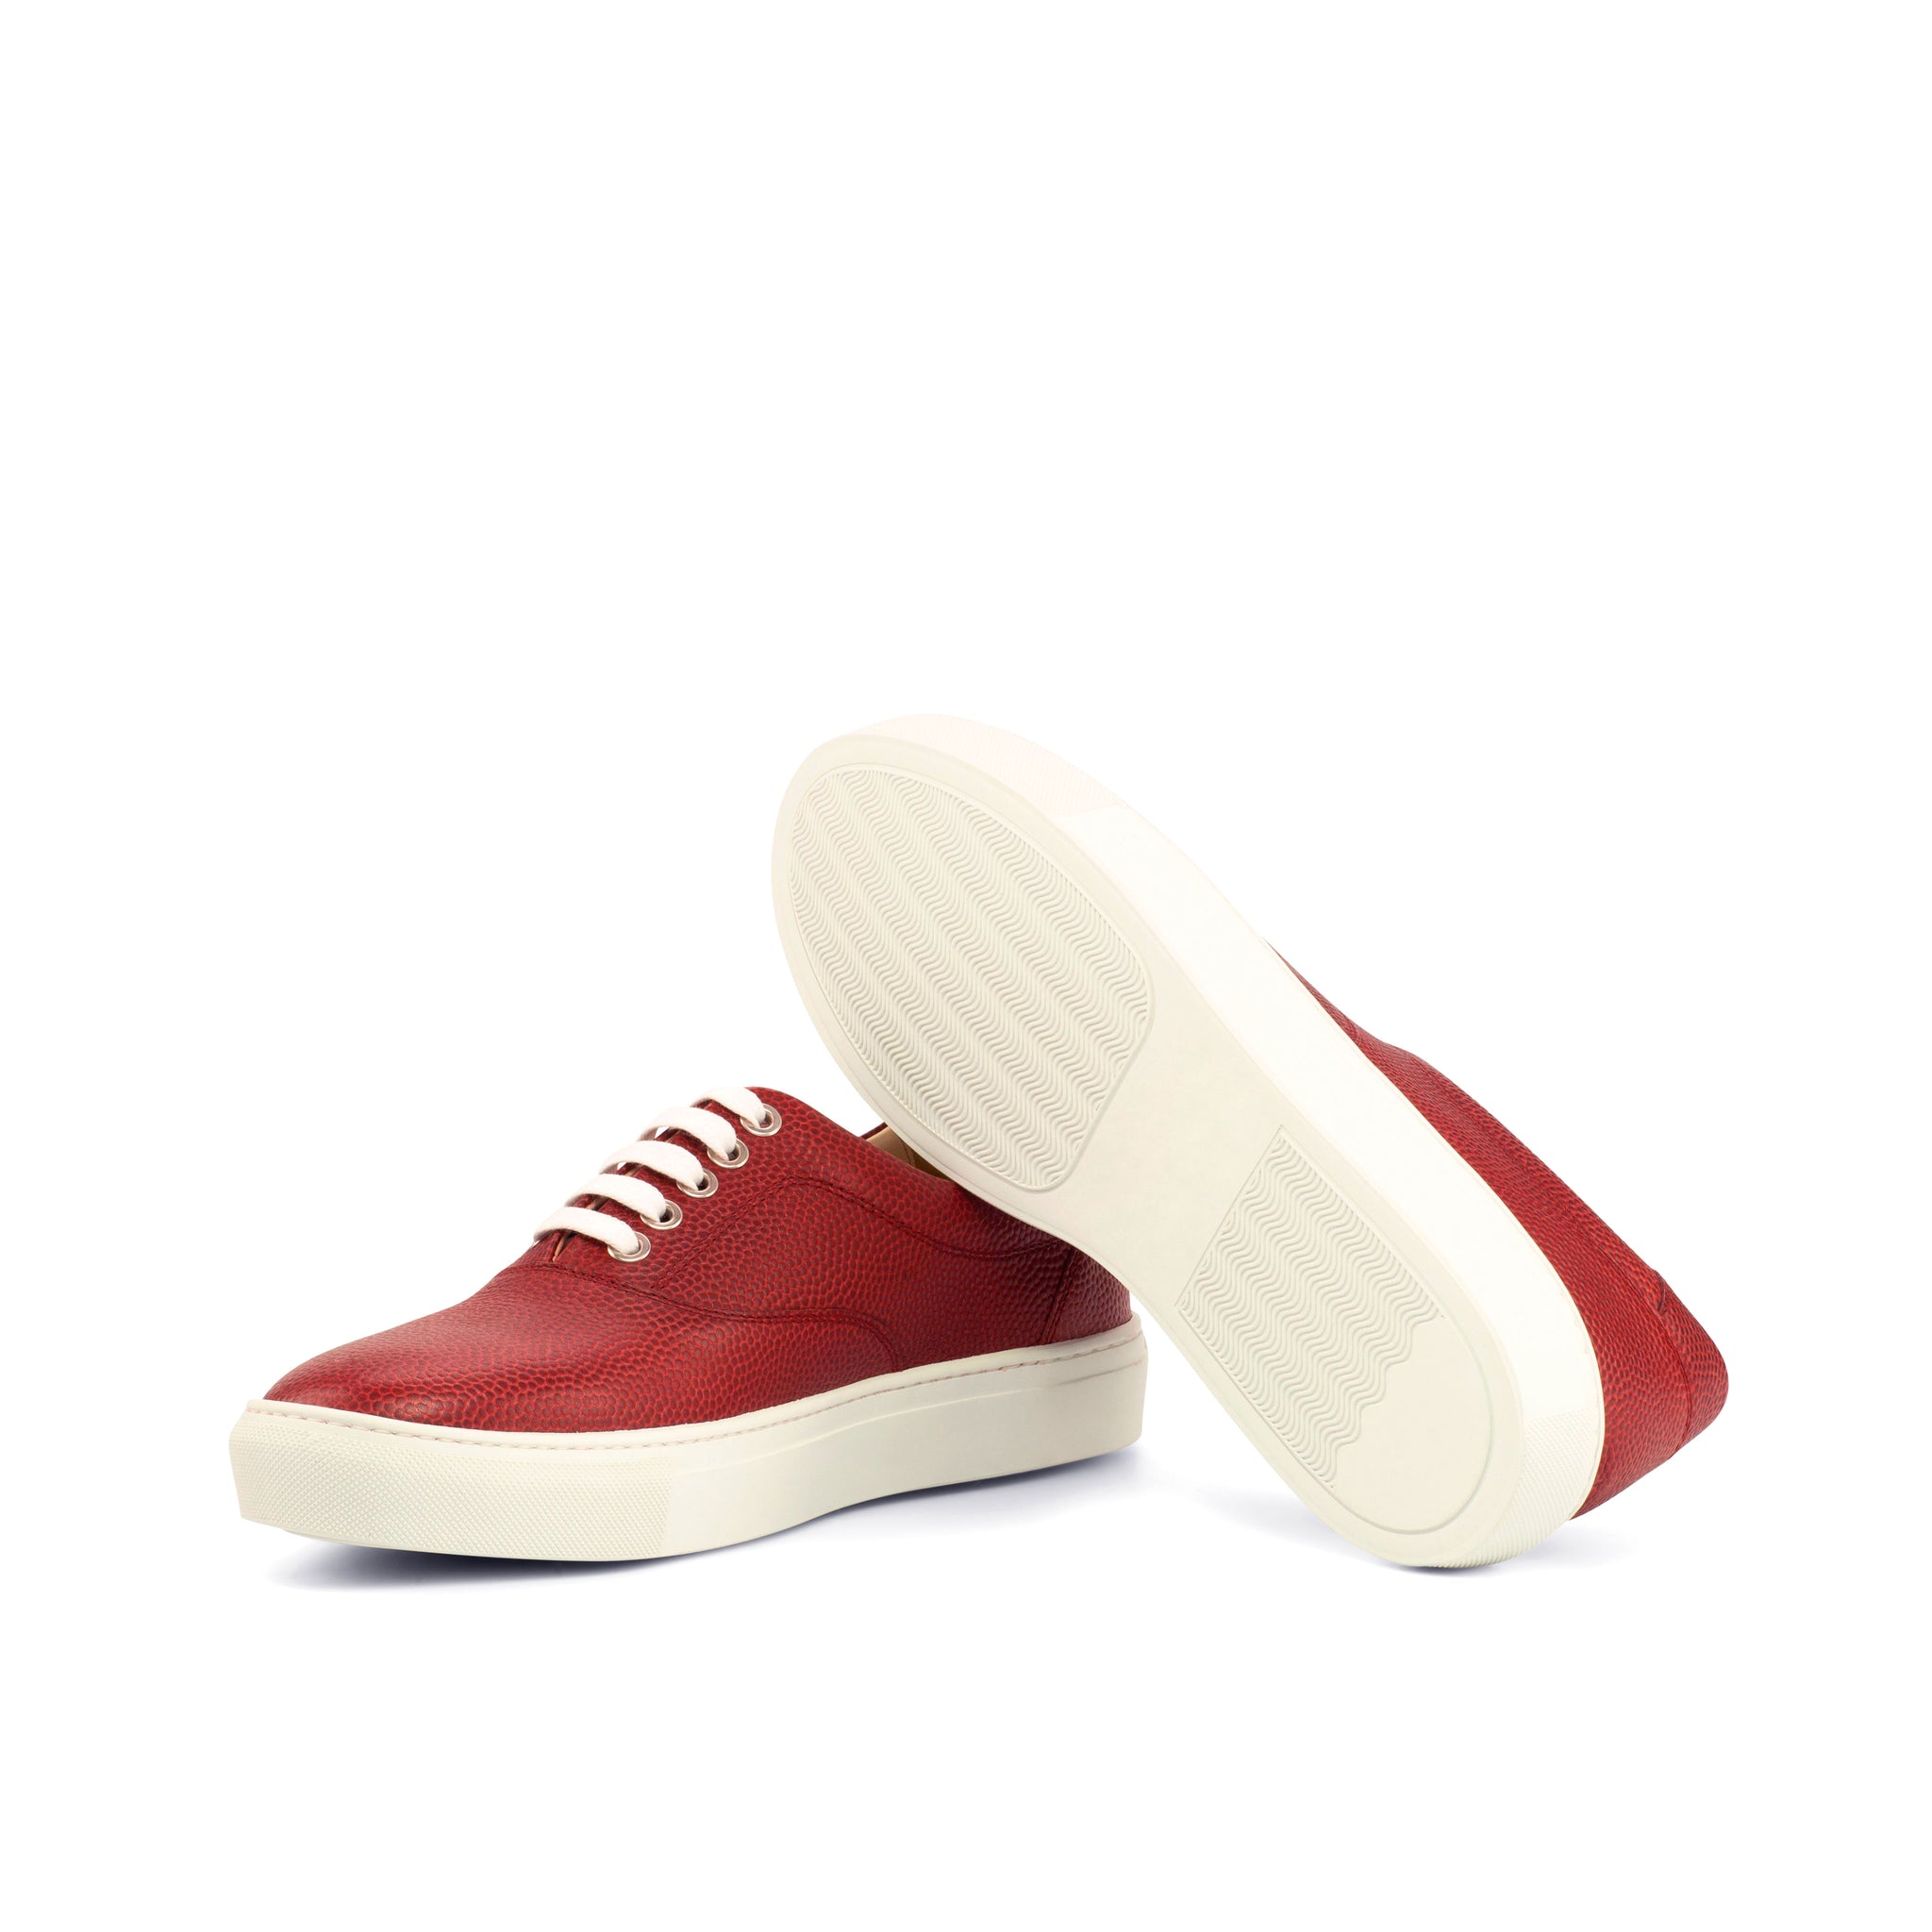 Unique Handcrafted Top Sider Sneaker - Pebble Grain Red